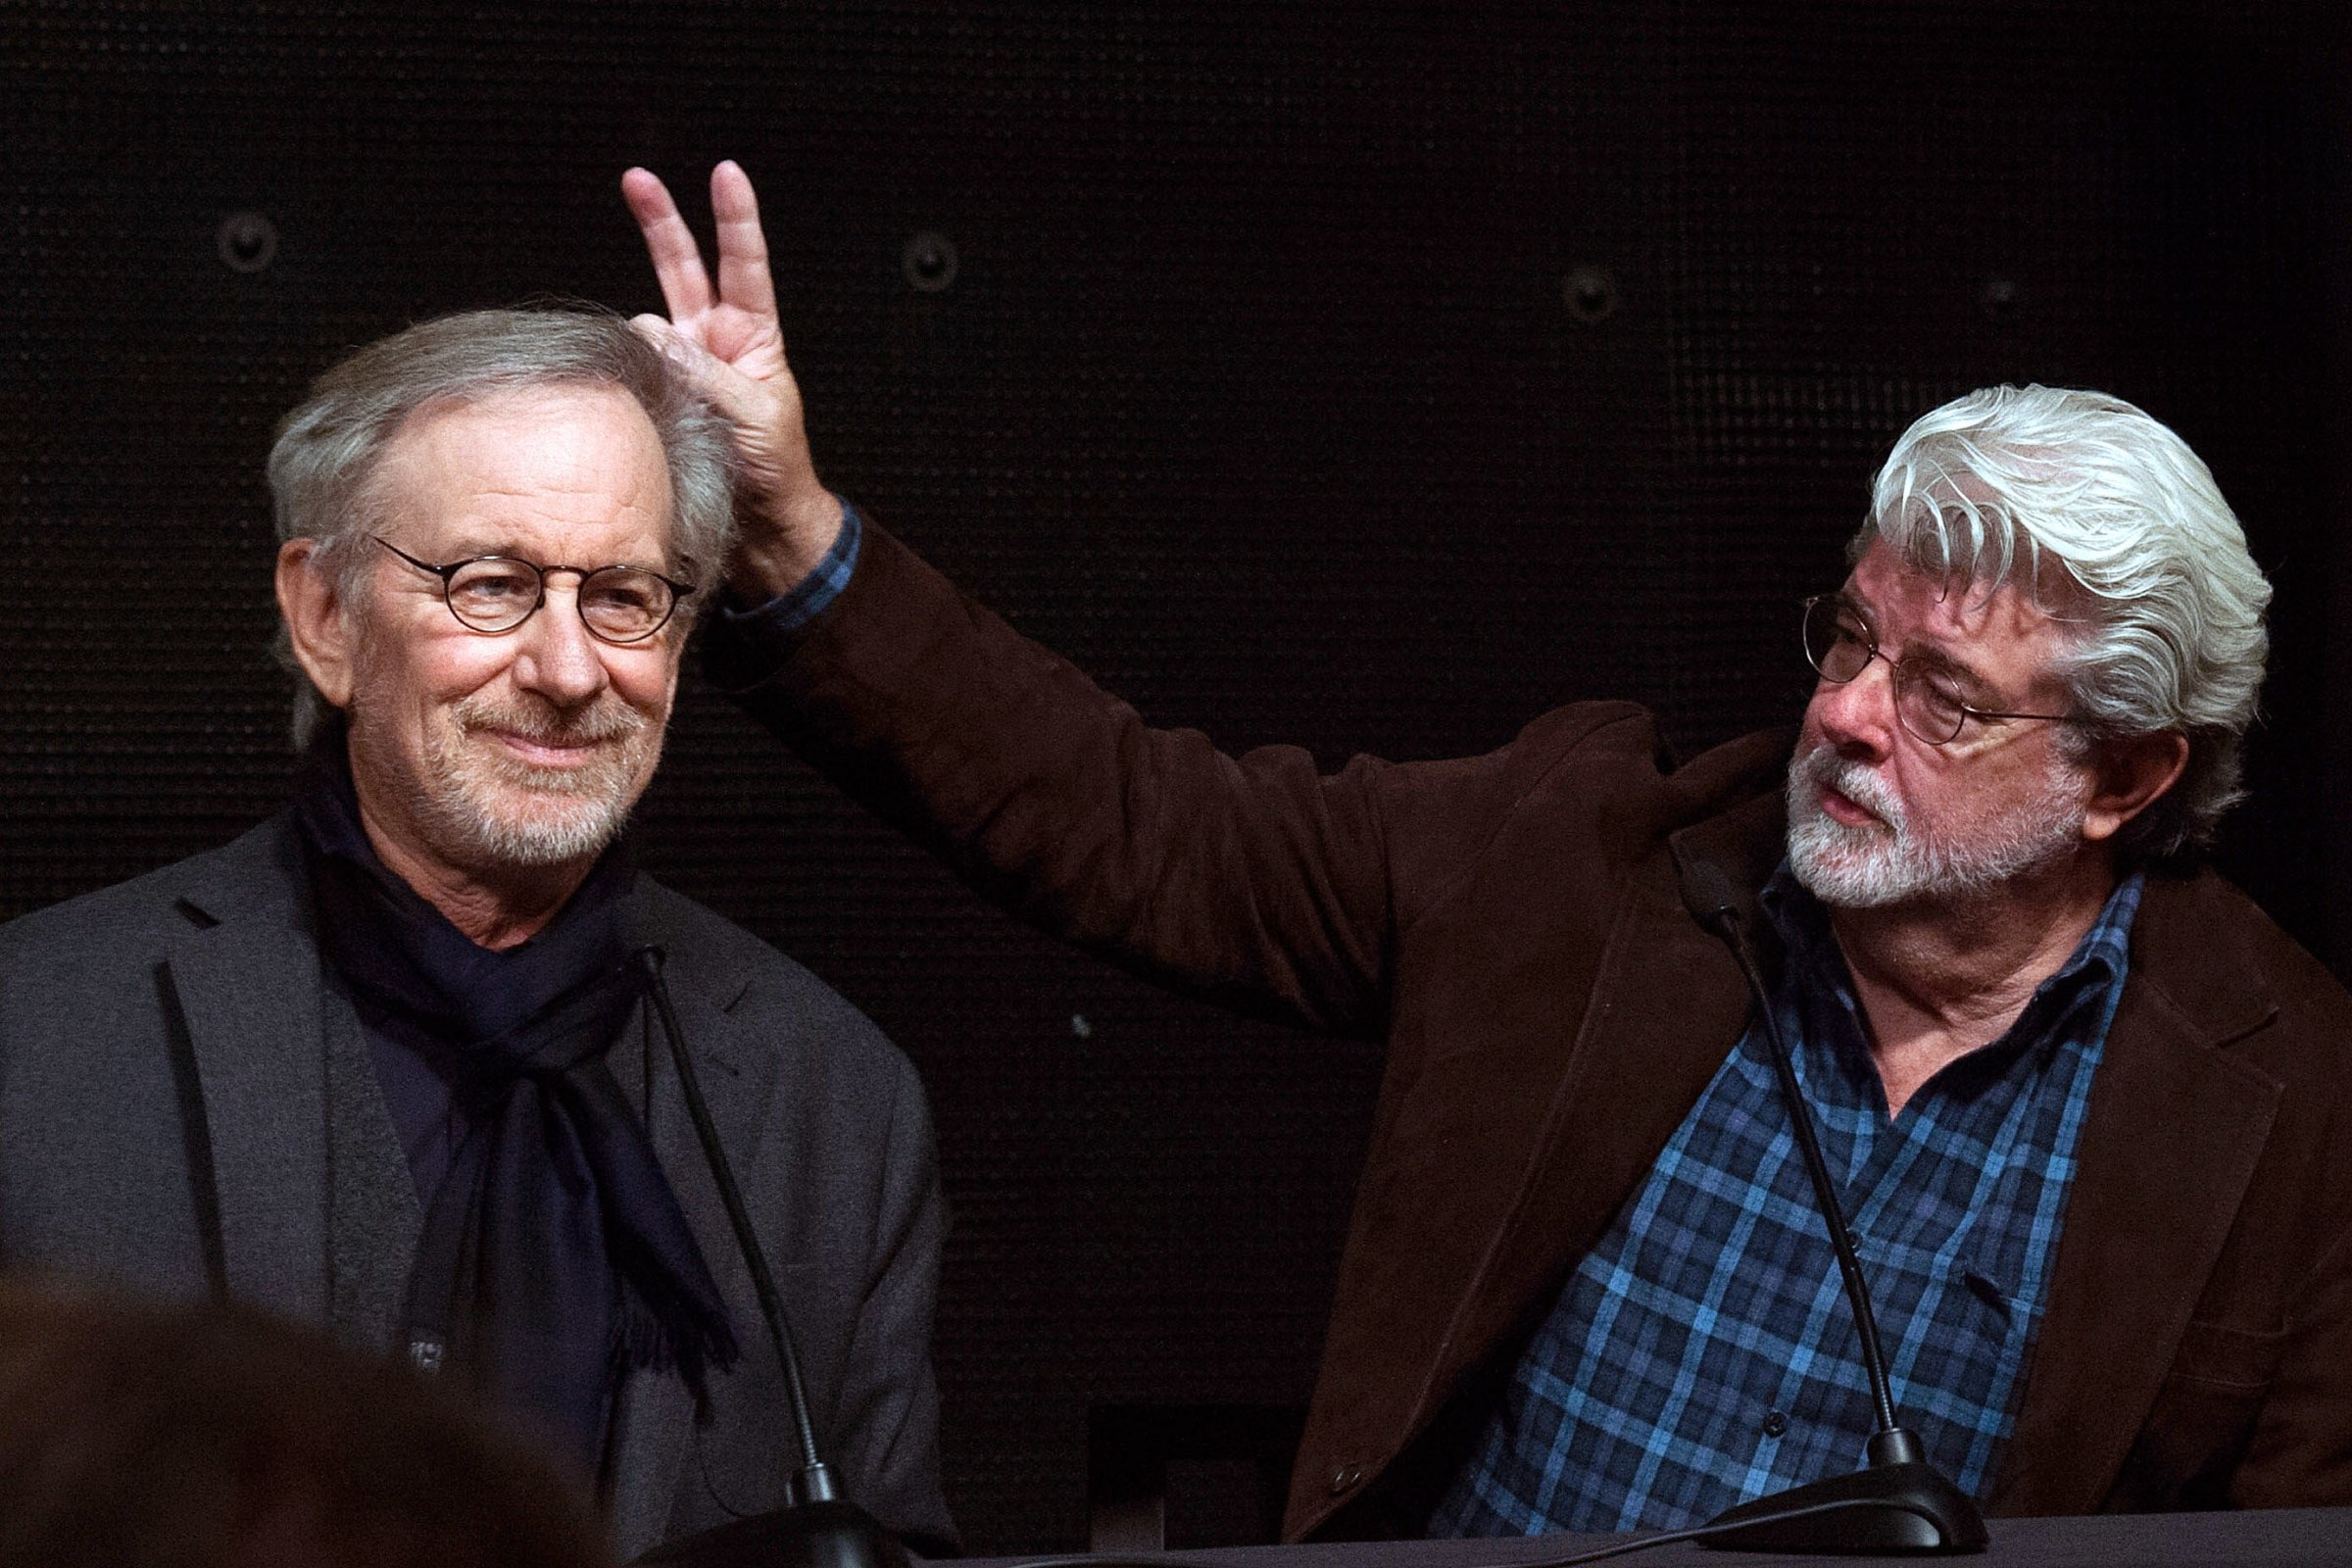 Steven Spielberg and George Lucas pal around.